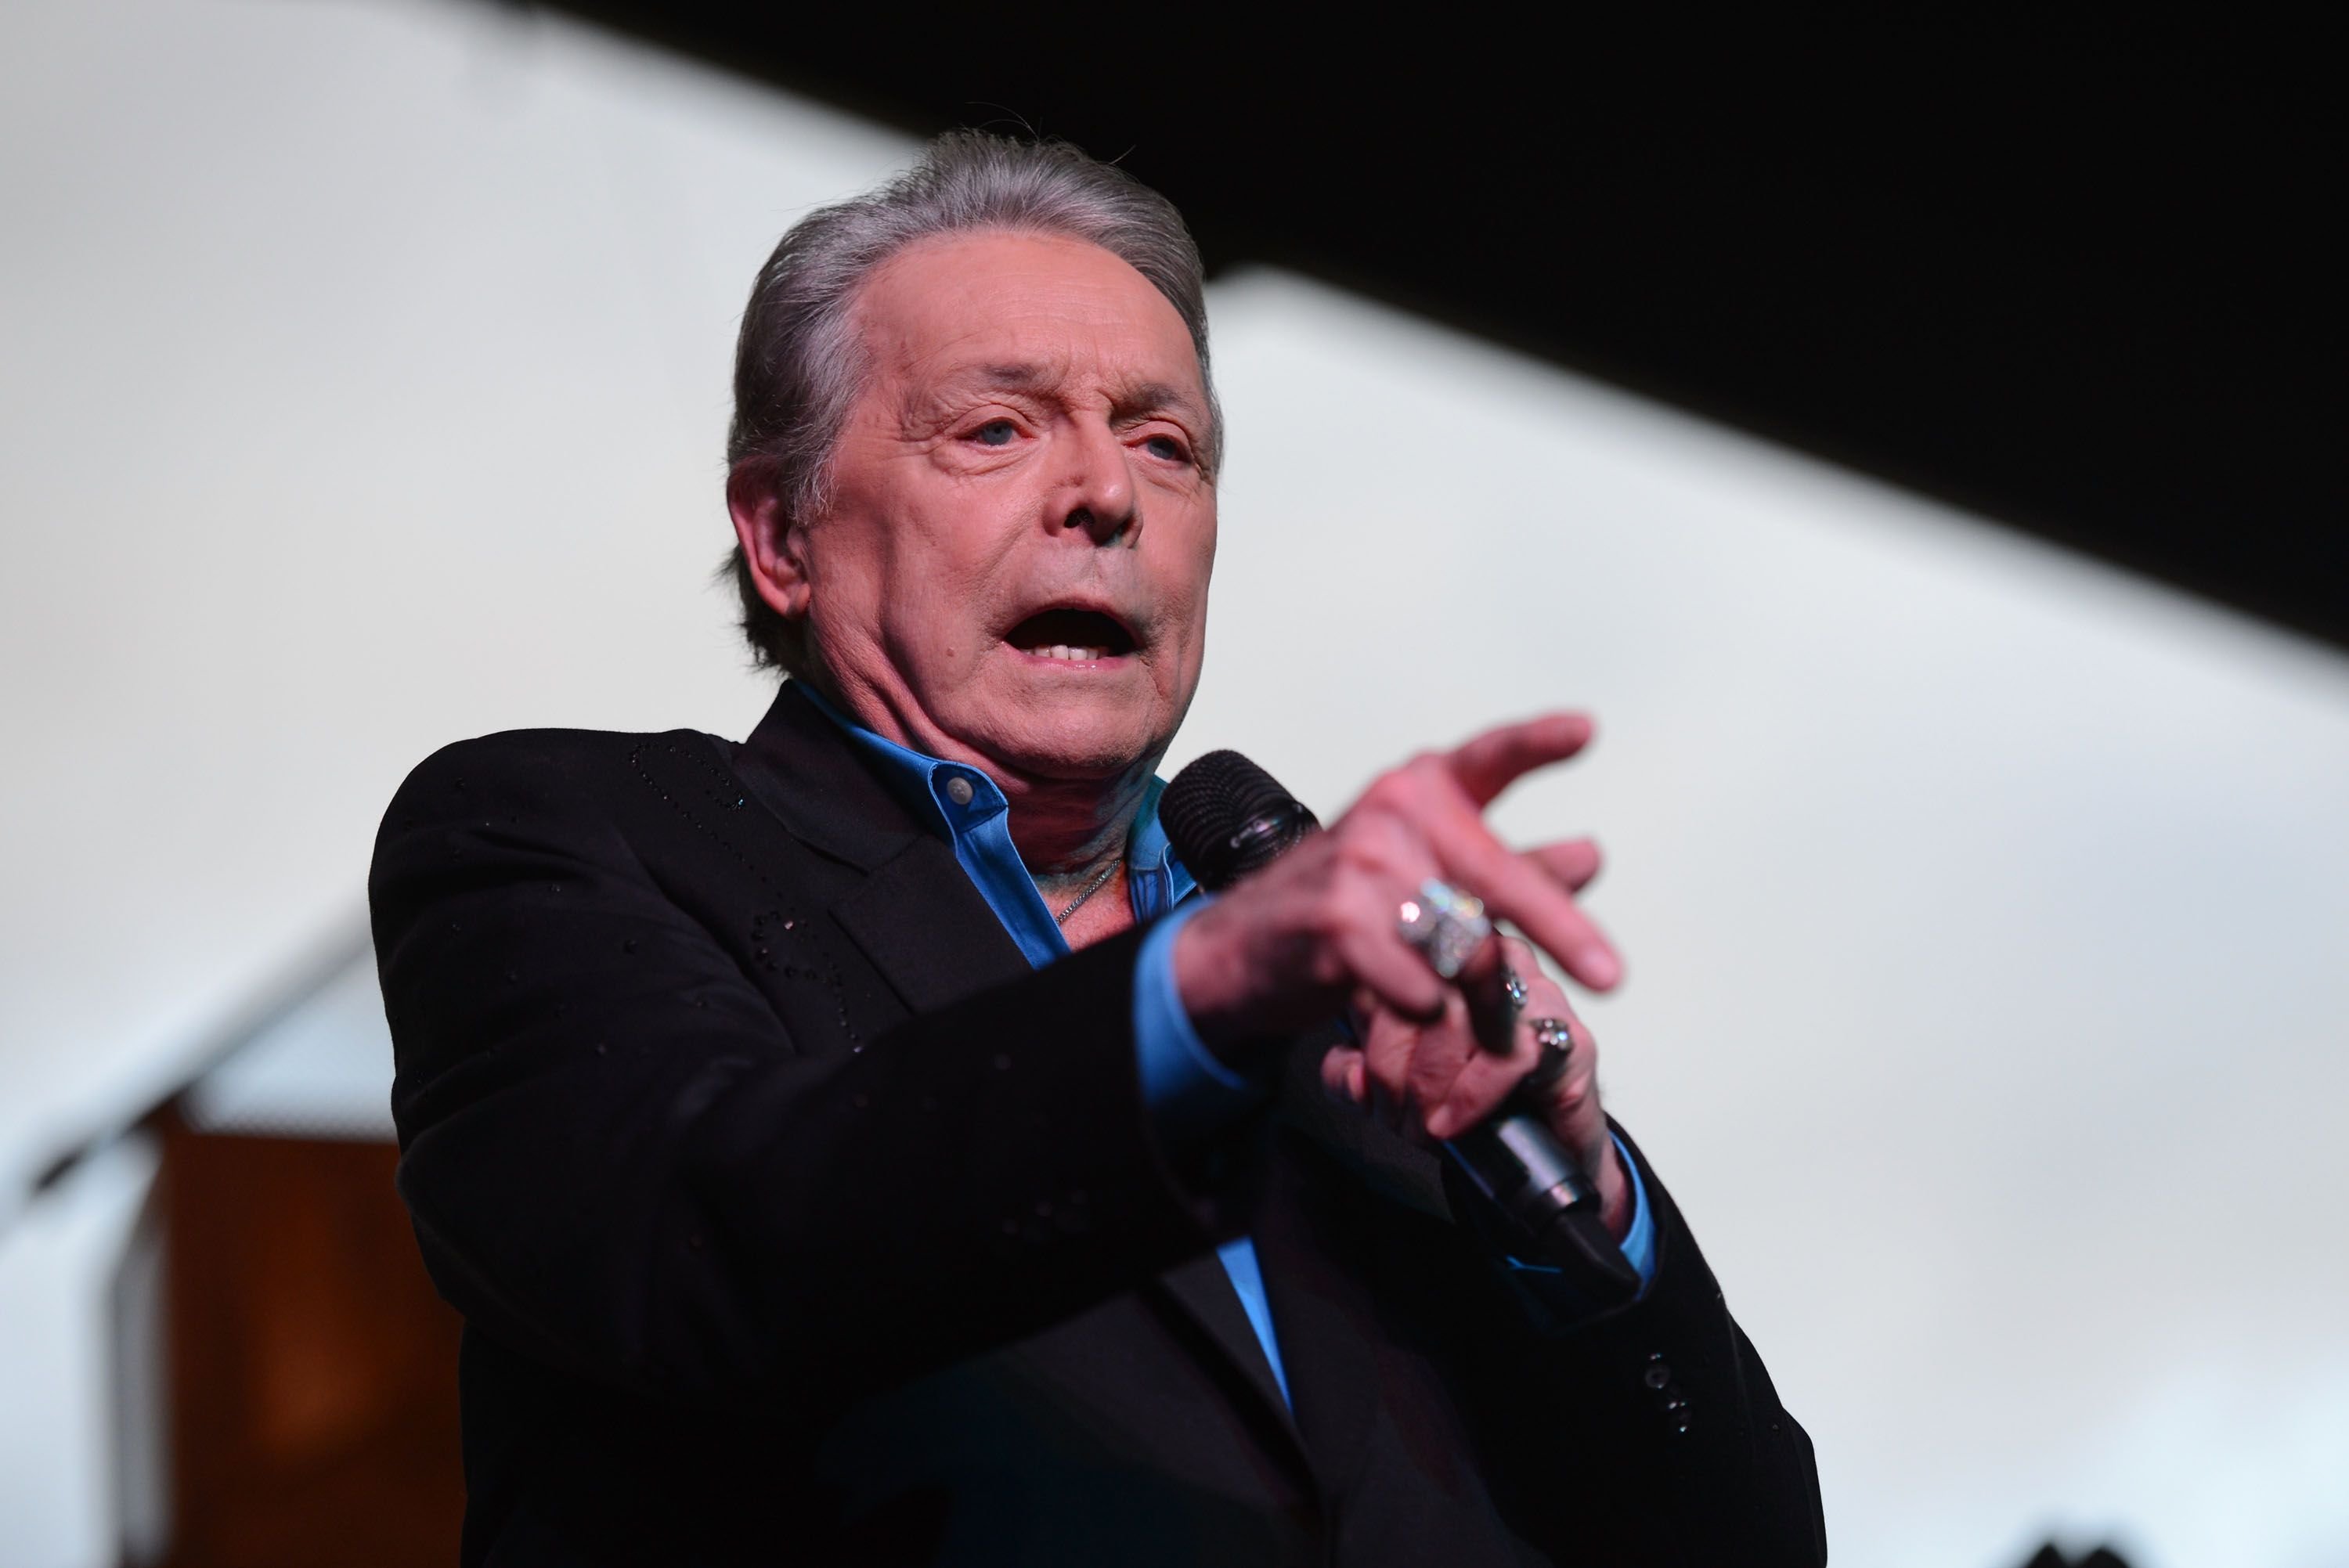 Mickey Gilley during the Stagecoach Music Festival at The Empire Polo Club on April 25, 2015, in Indio, California. | Source: Getty Images